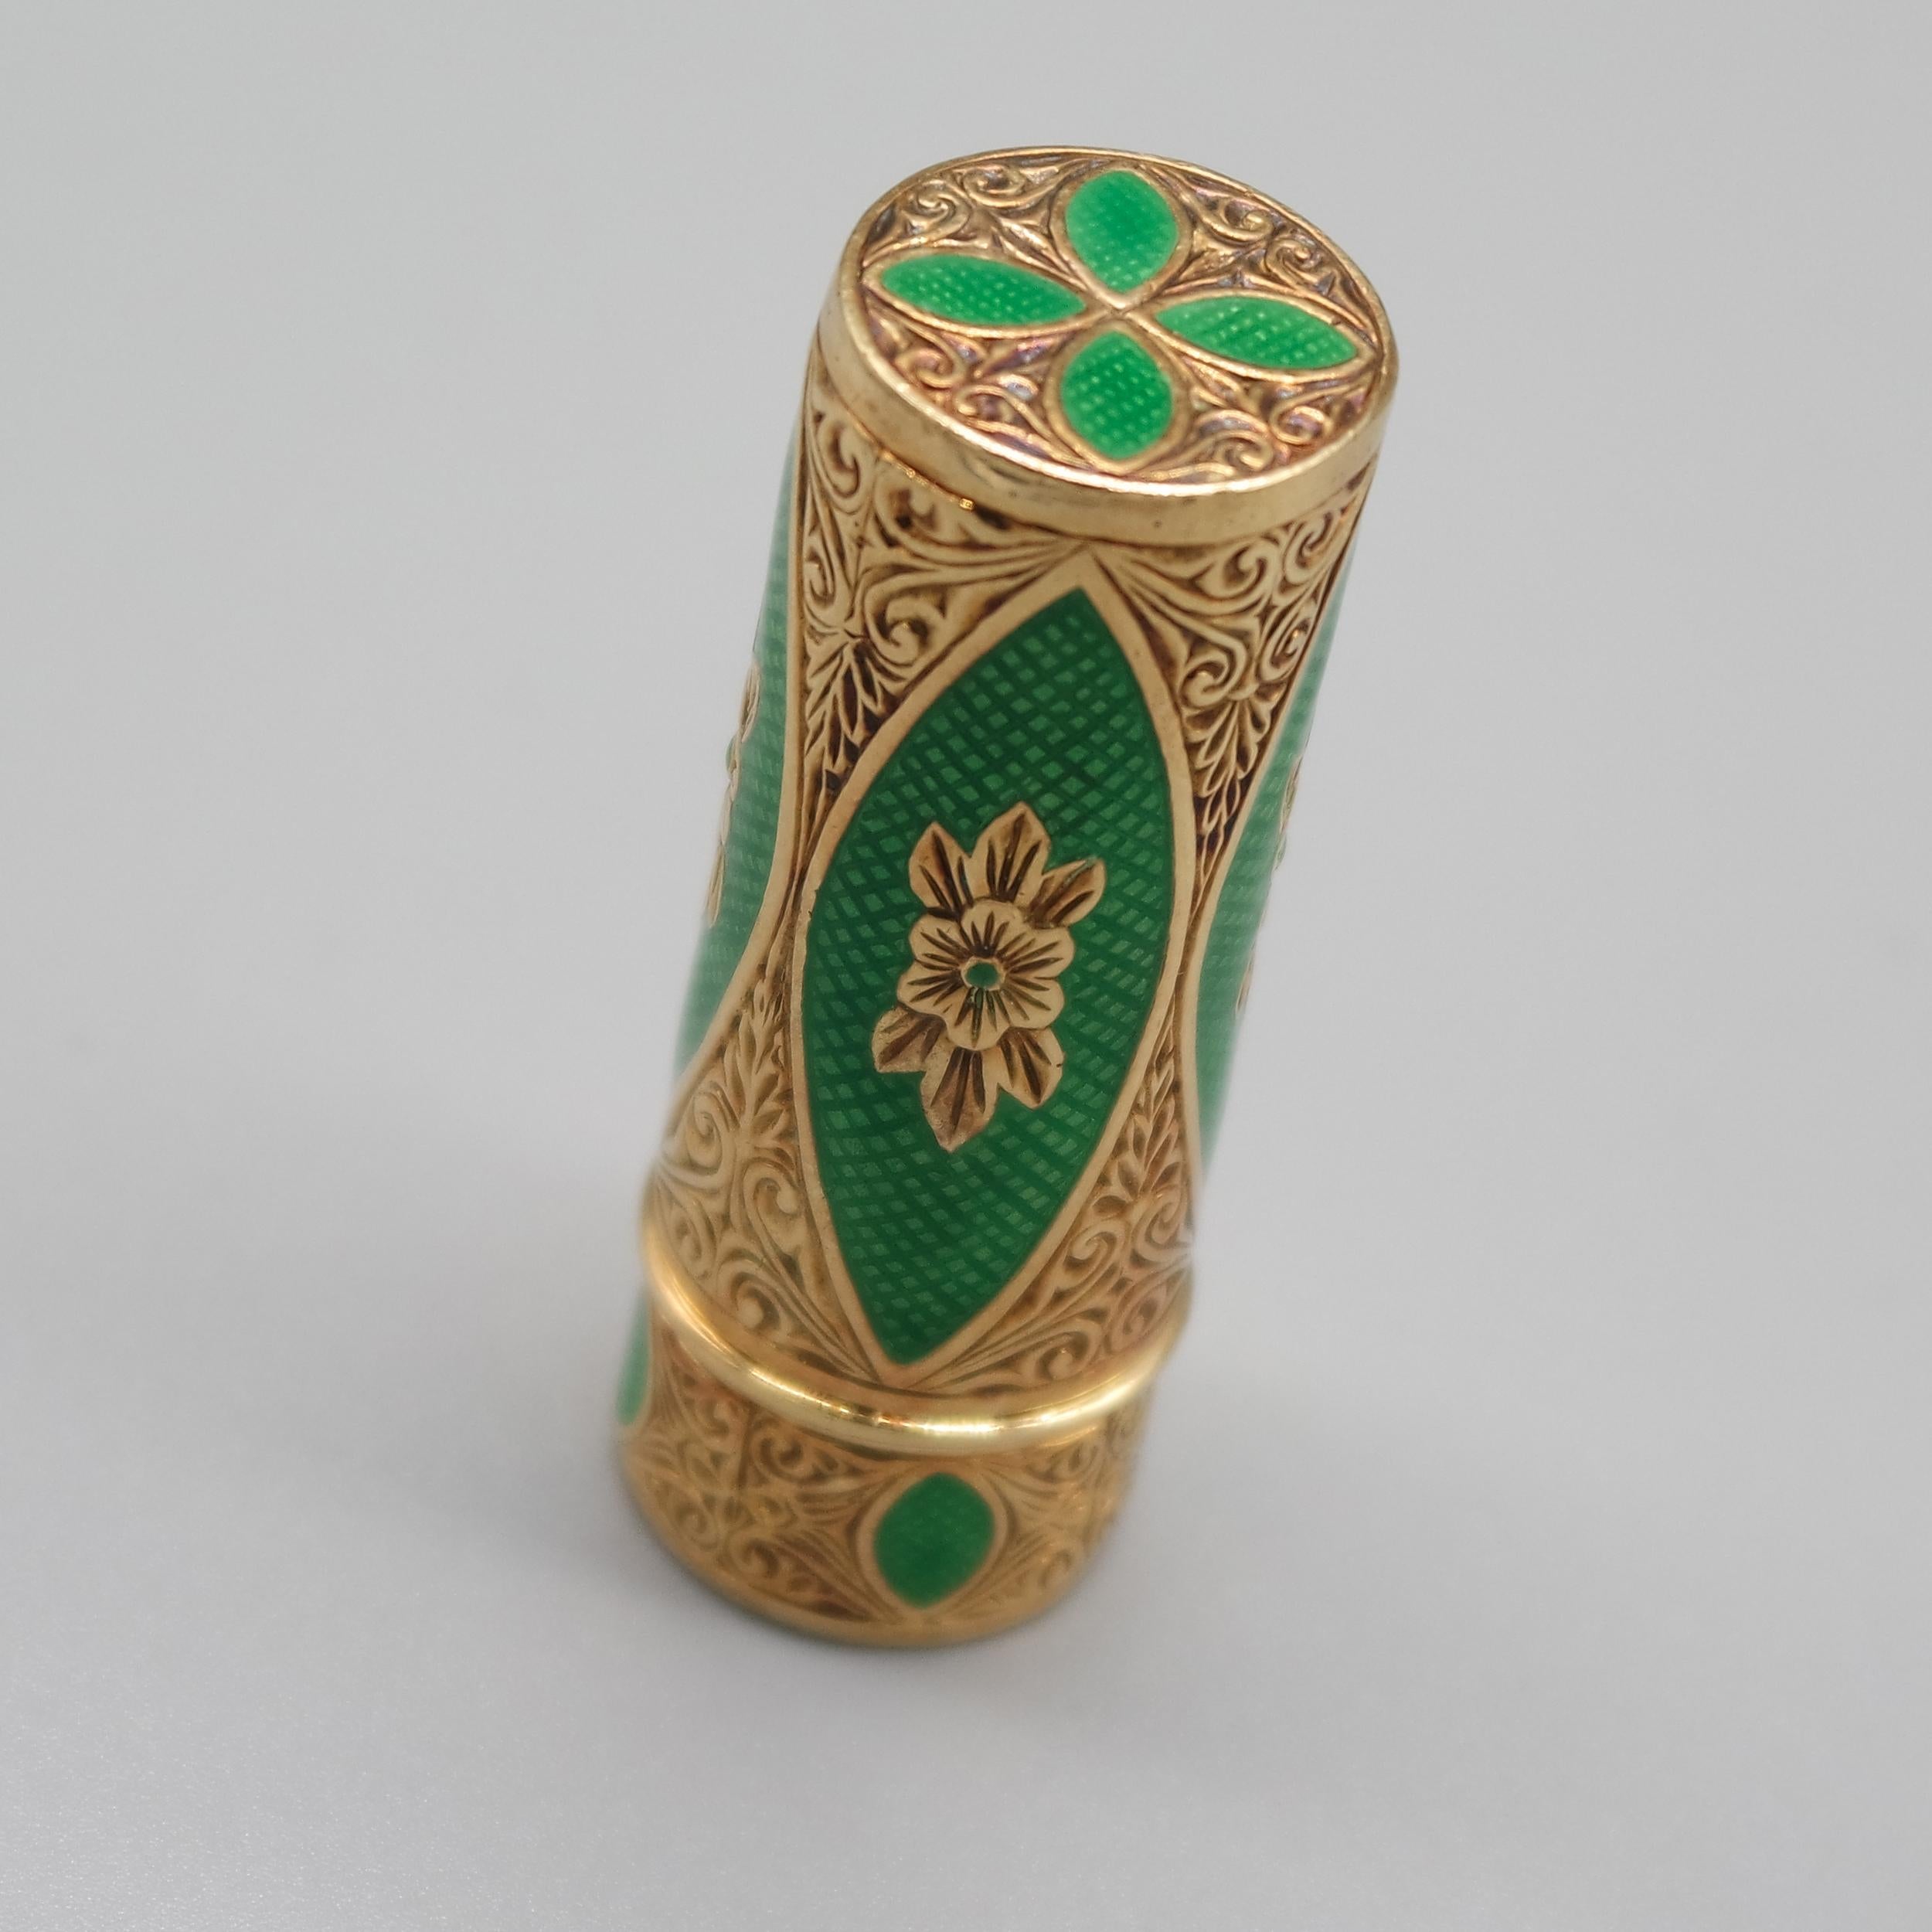 An original Italian  handcraft piece from the mid 20th century, made in 18Kt yellow gold with beautiful carved motifs and deep green guilloché enamel.
This was certainly a nécessaire de voyage, as per its tiny dimensions and rounded shape. However,